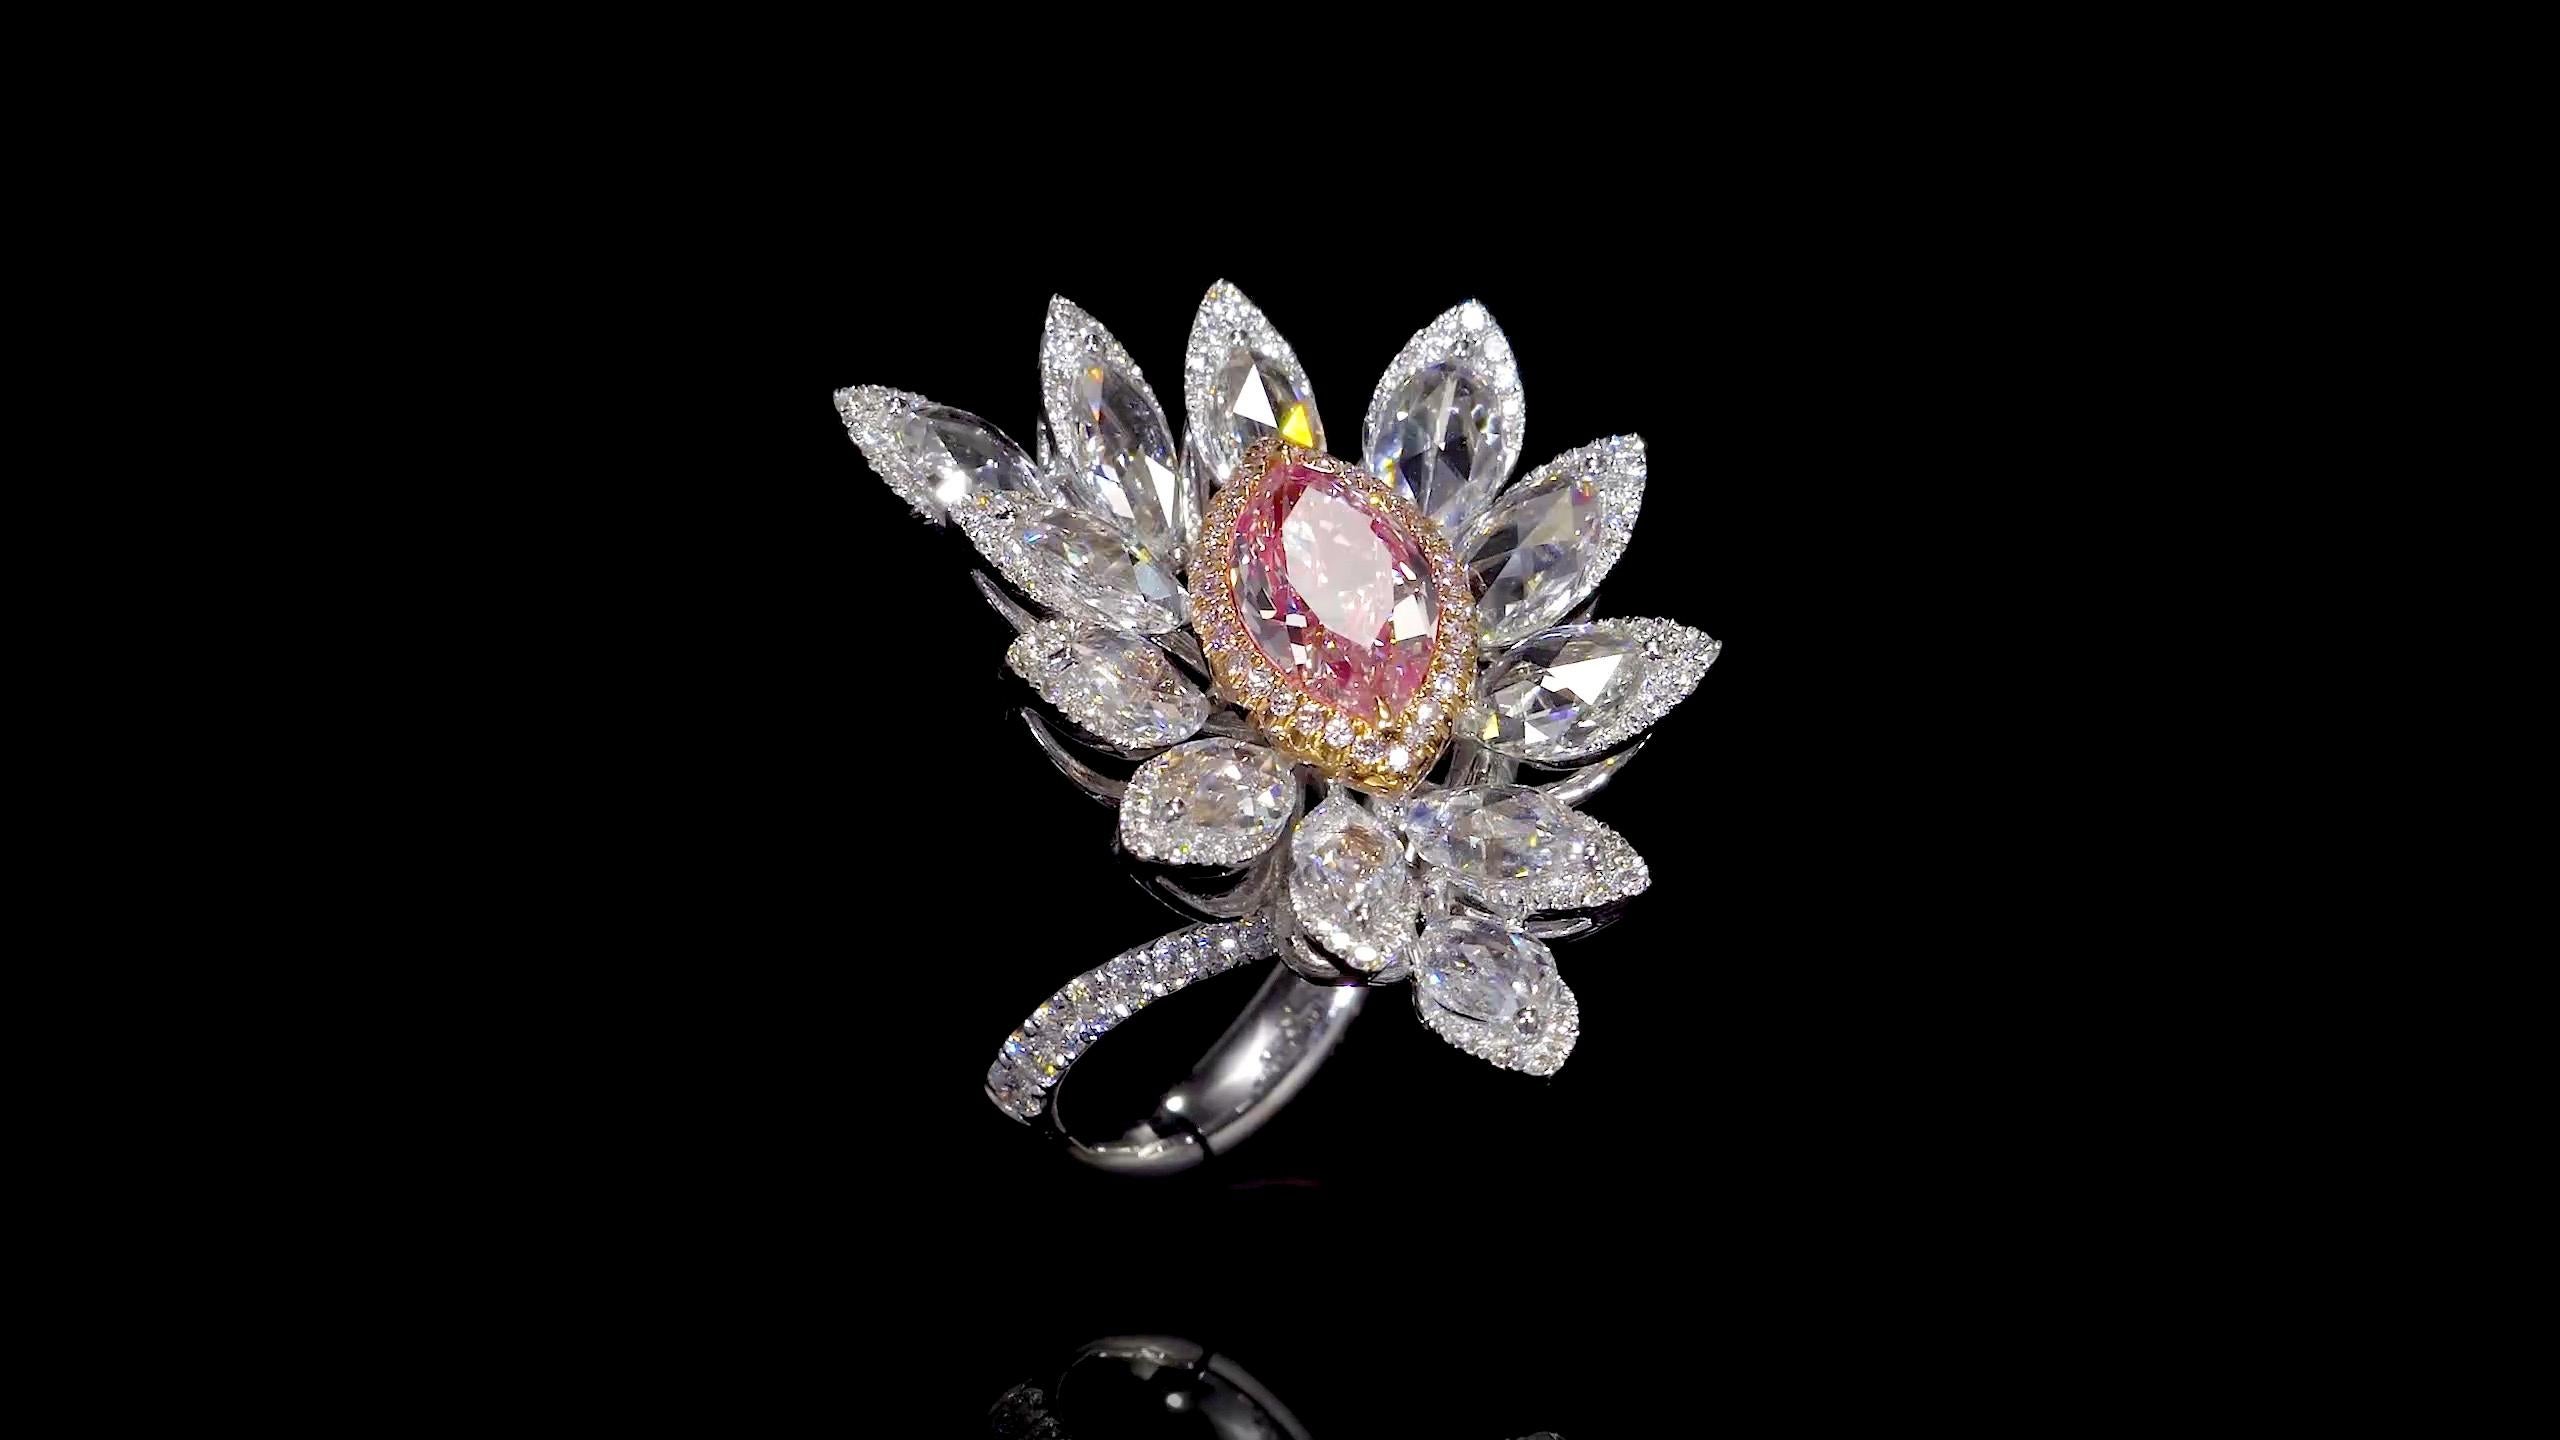 From The Museum Vault At Emilio Jewelry New York,
An earring and ring set of magnificent natural Gia certified Fancy B. Pink Diamonds. After Emilio Jewelry created this magnificent mounting, to bring out the very best potential of these rare